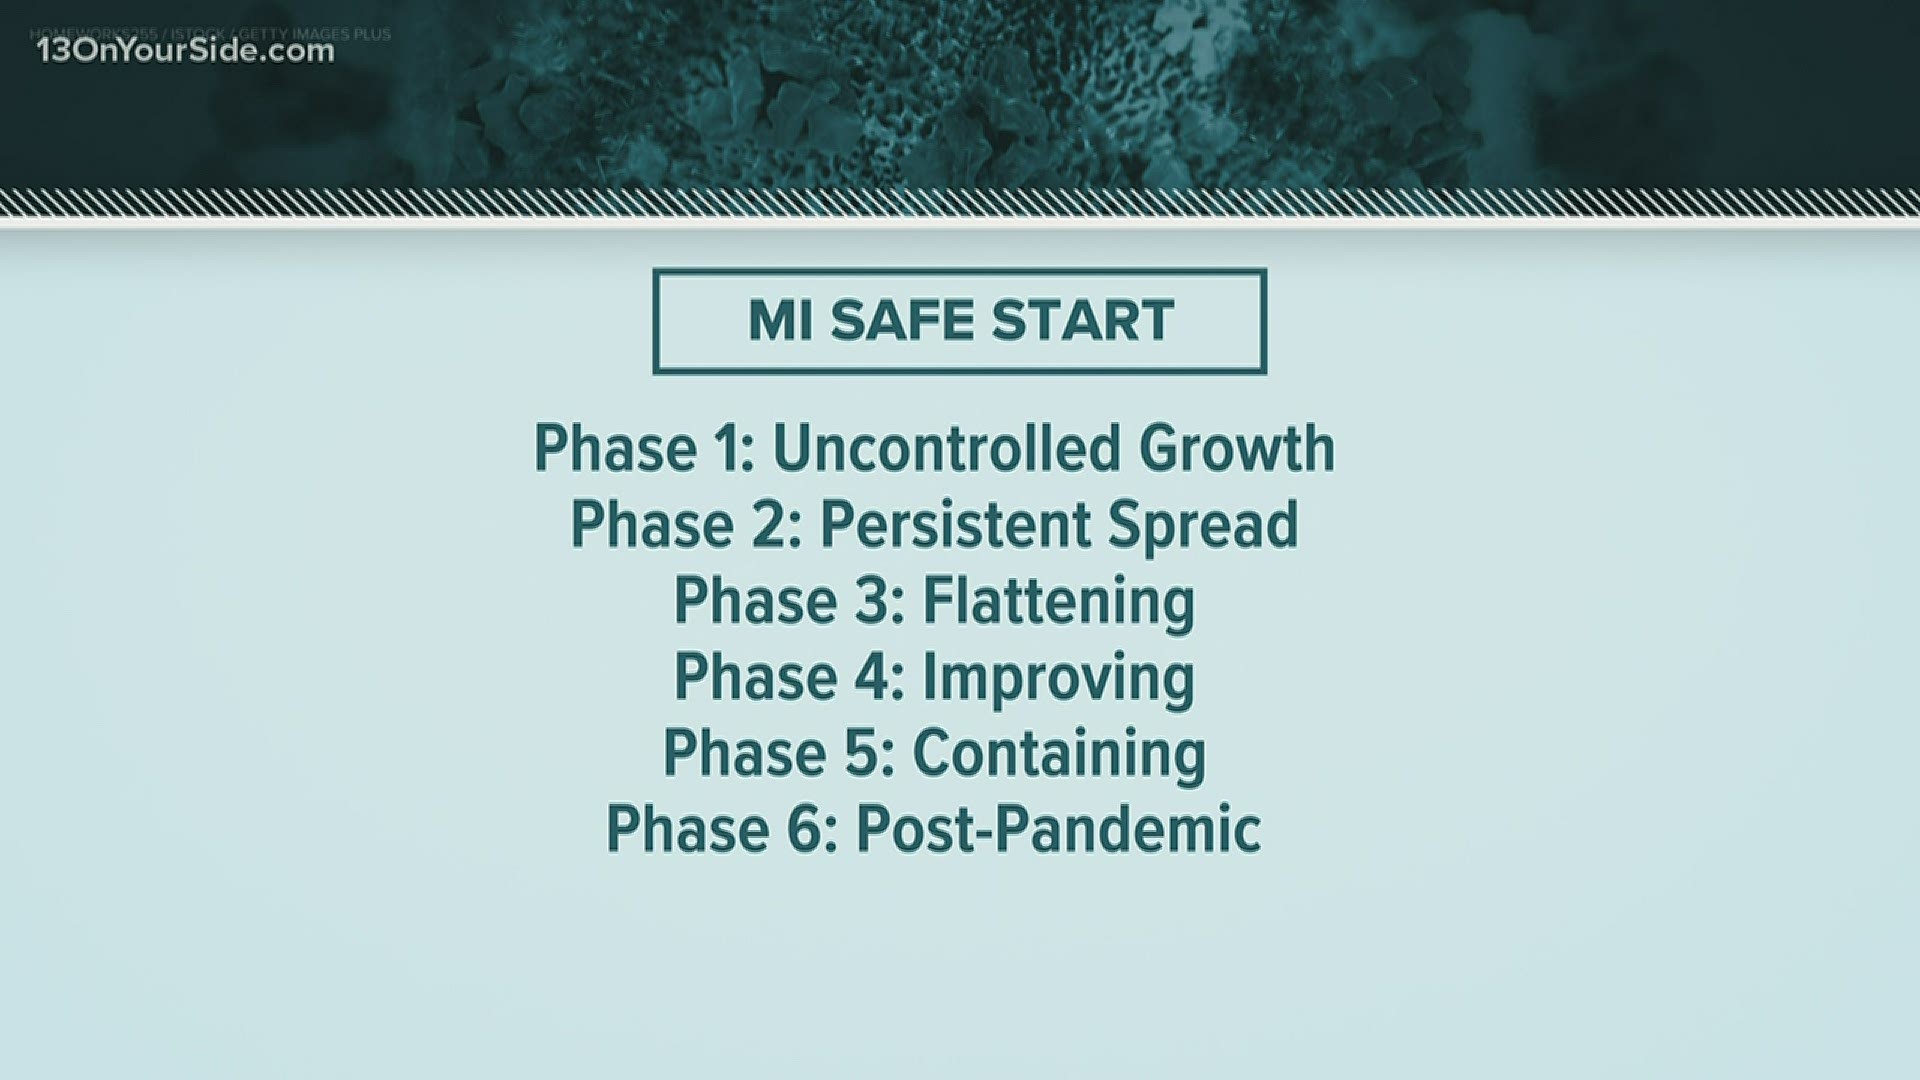 Governor Gretchen Whitmer detailed the six phases of her MI Safe Start Plan to re-engage Michigan’s economy.